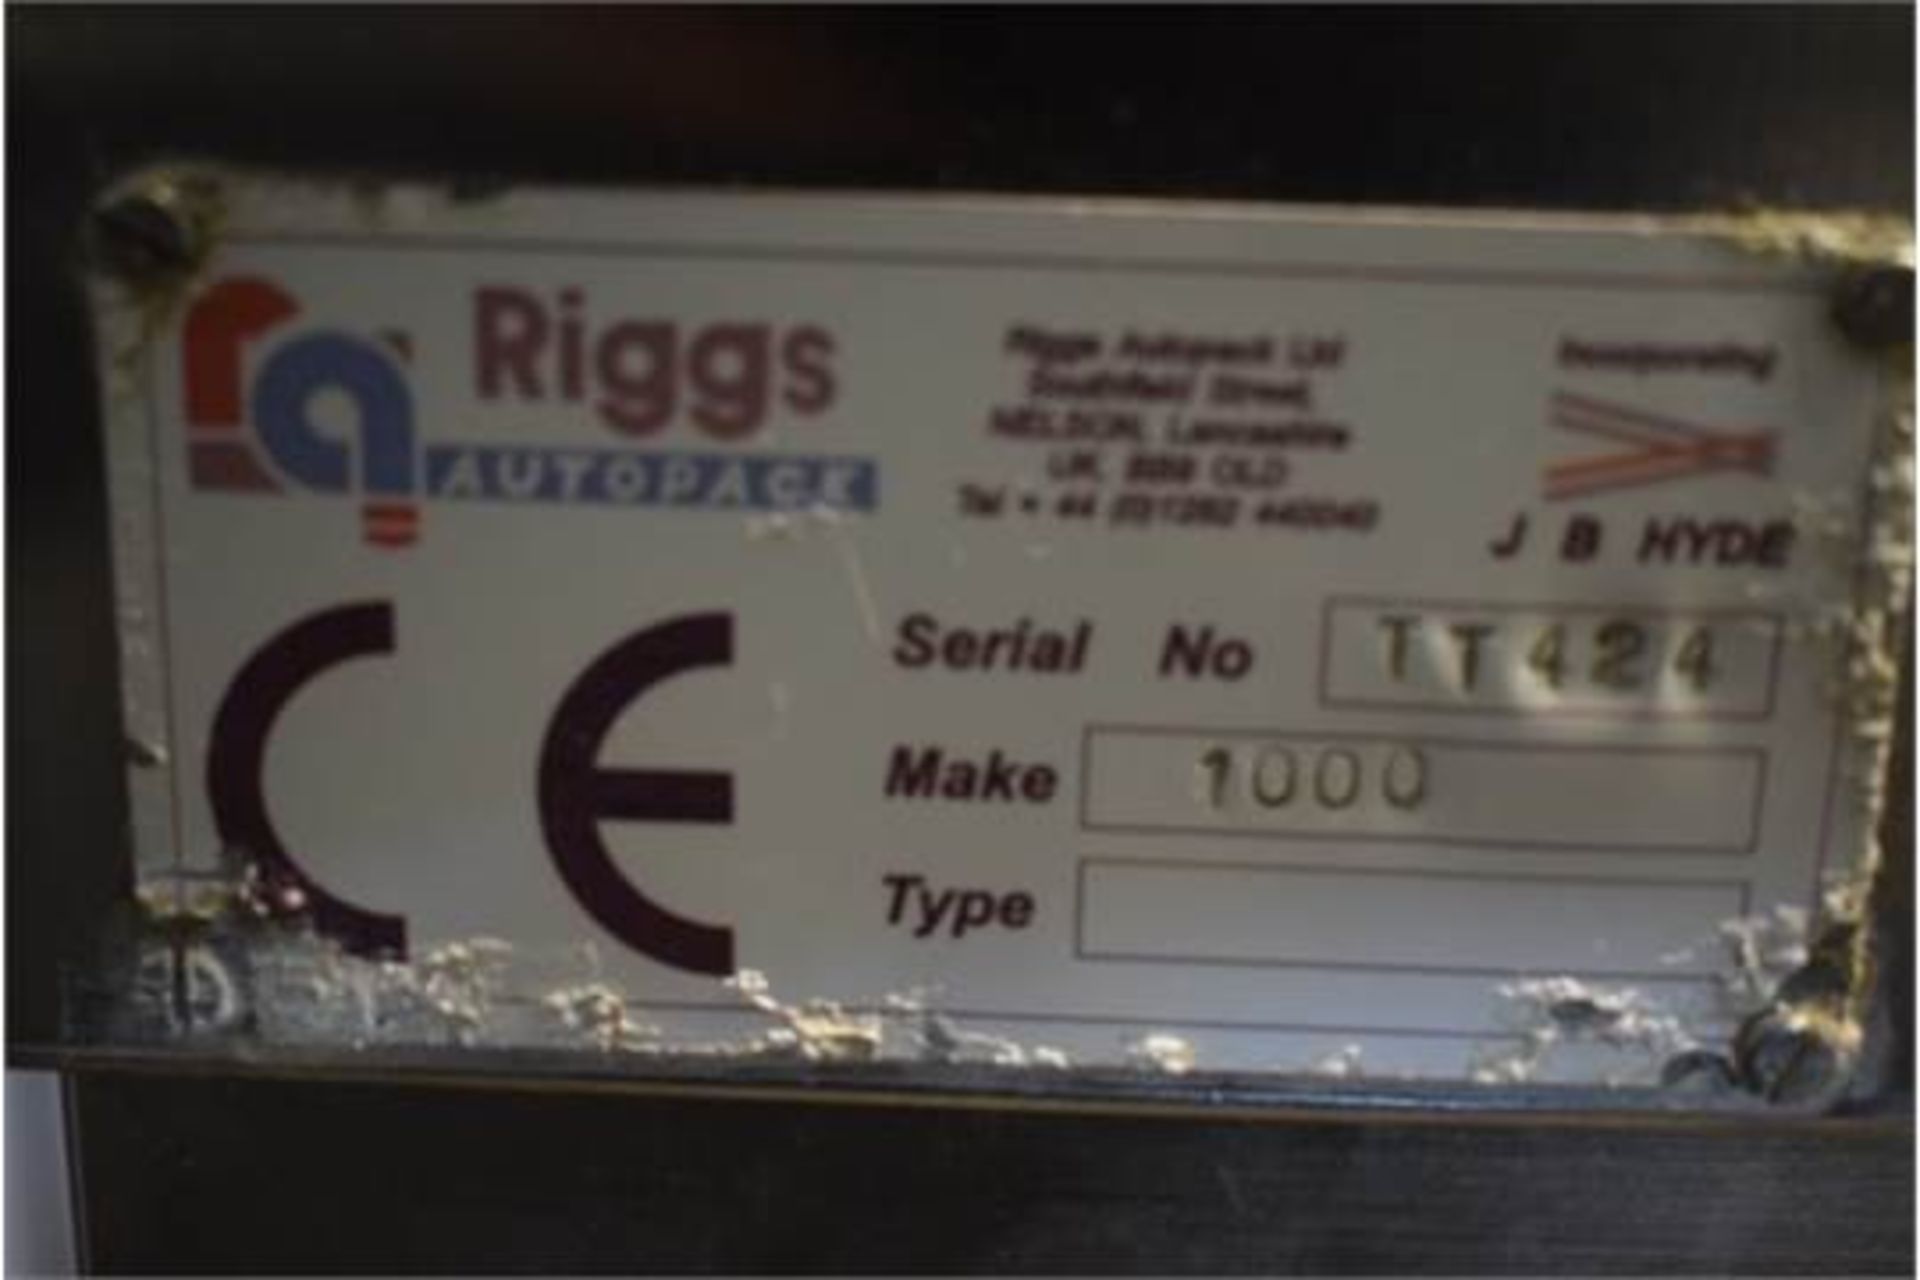 Riggs Autopack 1000 Single Head Depositor _x00D_ Model 1000 175ml Deposit_x00D_ Ideal for filling of - Image 5 of 5